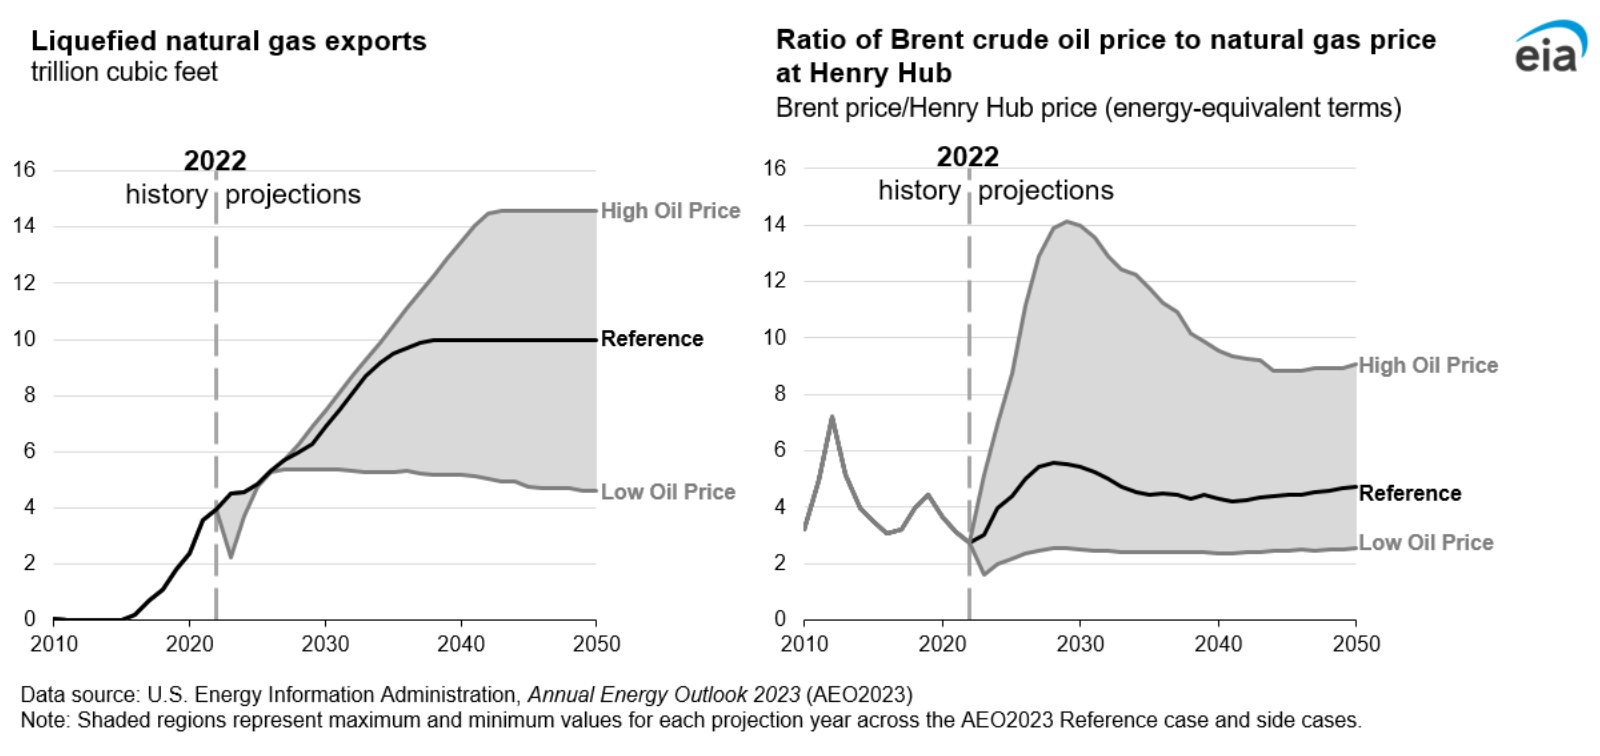 Figure 17. Liquefied natural gas exports; Ratio of Brent crude oil price to natural gas price at Henry Hub